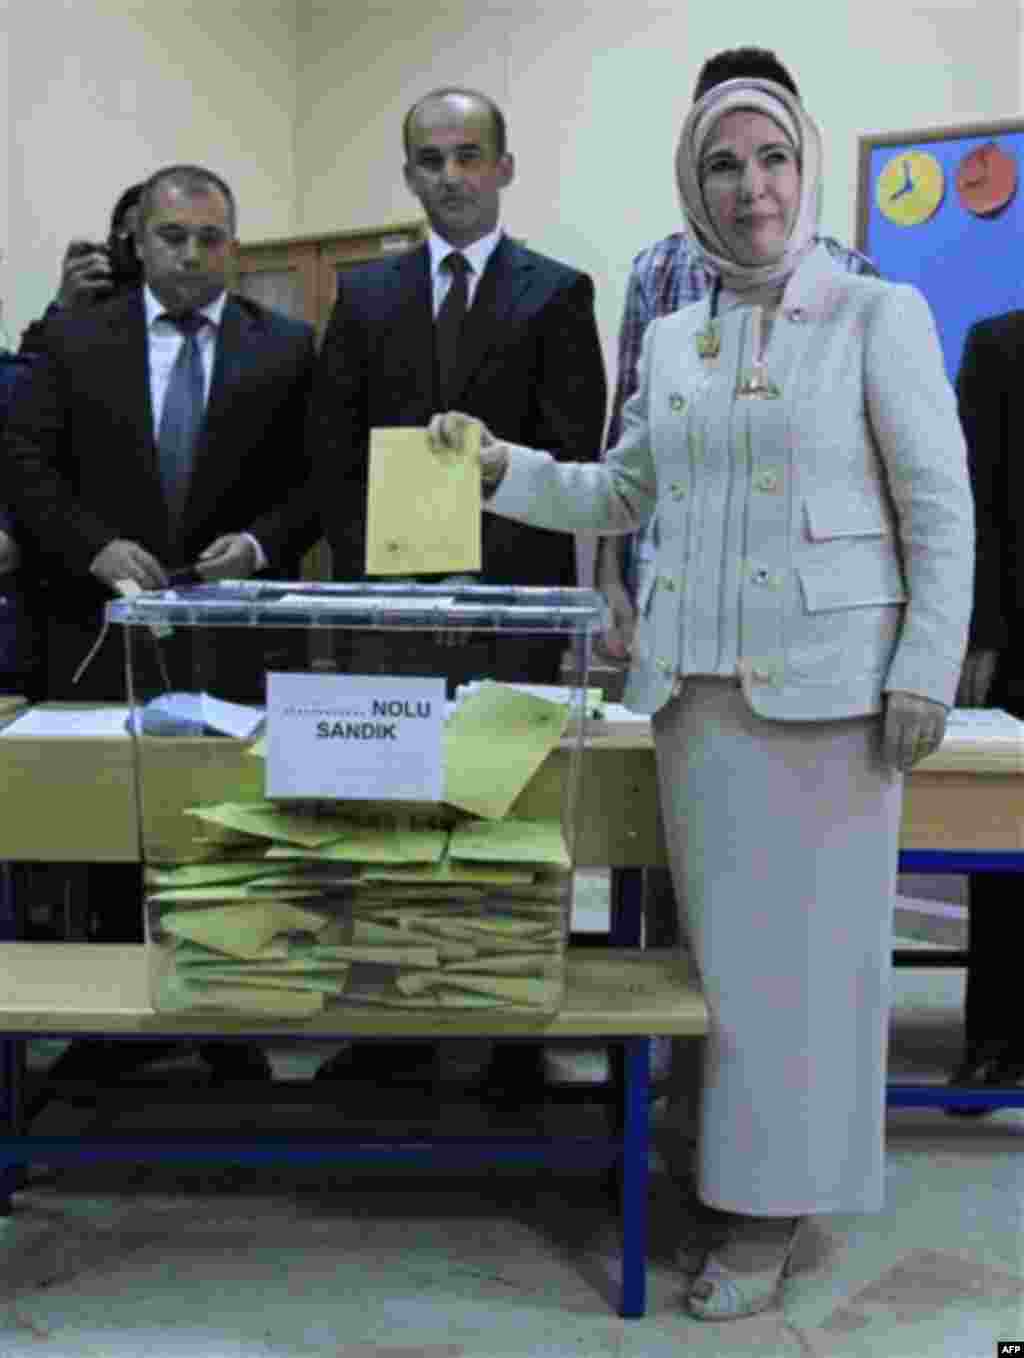 Emine Erdogan wife of Turkish Prime Minister Recep Tayyip Erdogan casts her ballot at a polling station in Istanbul, Sunday, June 12, 2011. About 52 million Turks vote In Sunday's general elections. Turkey's ruling party sought a third term in elections S